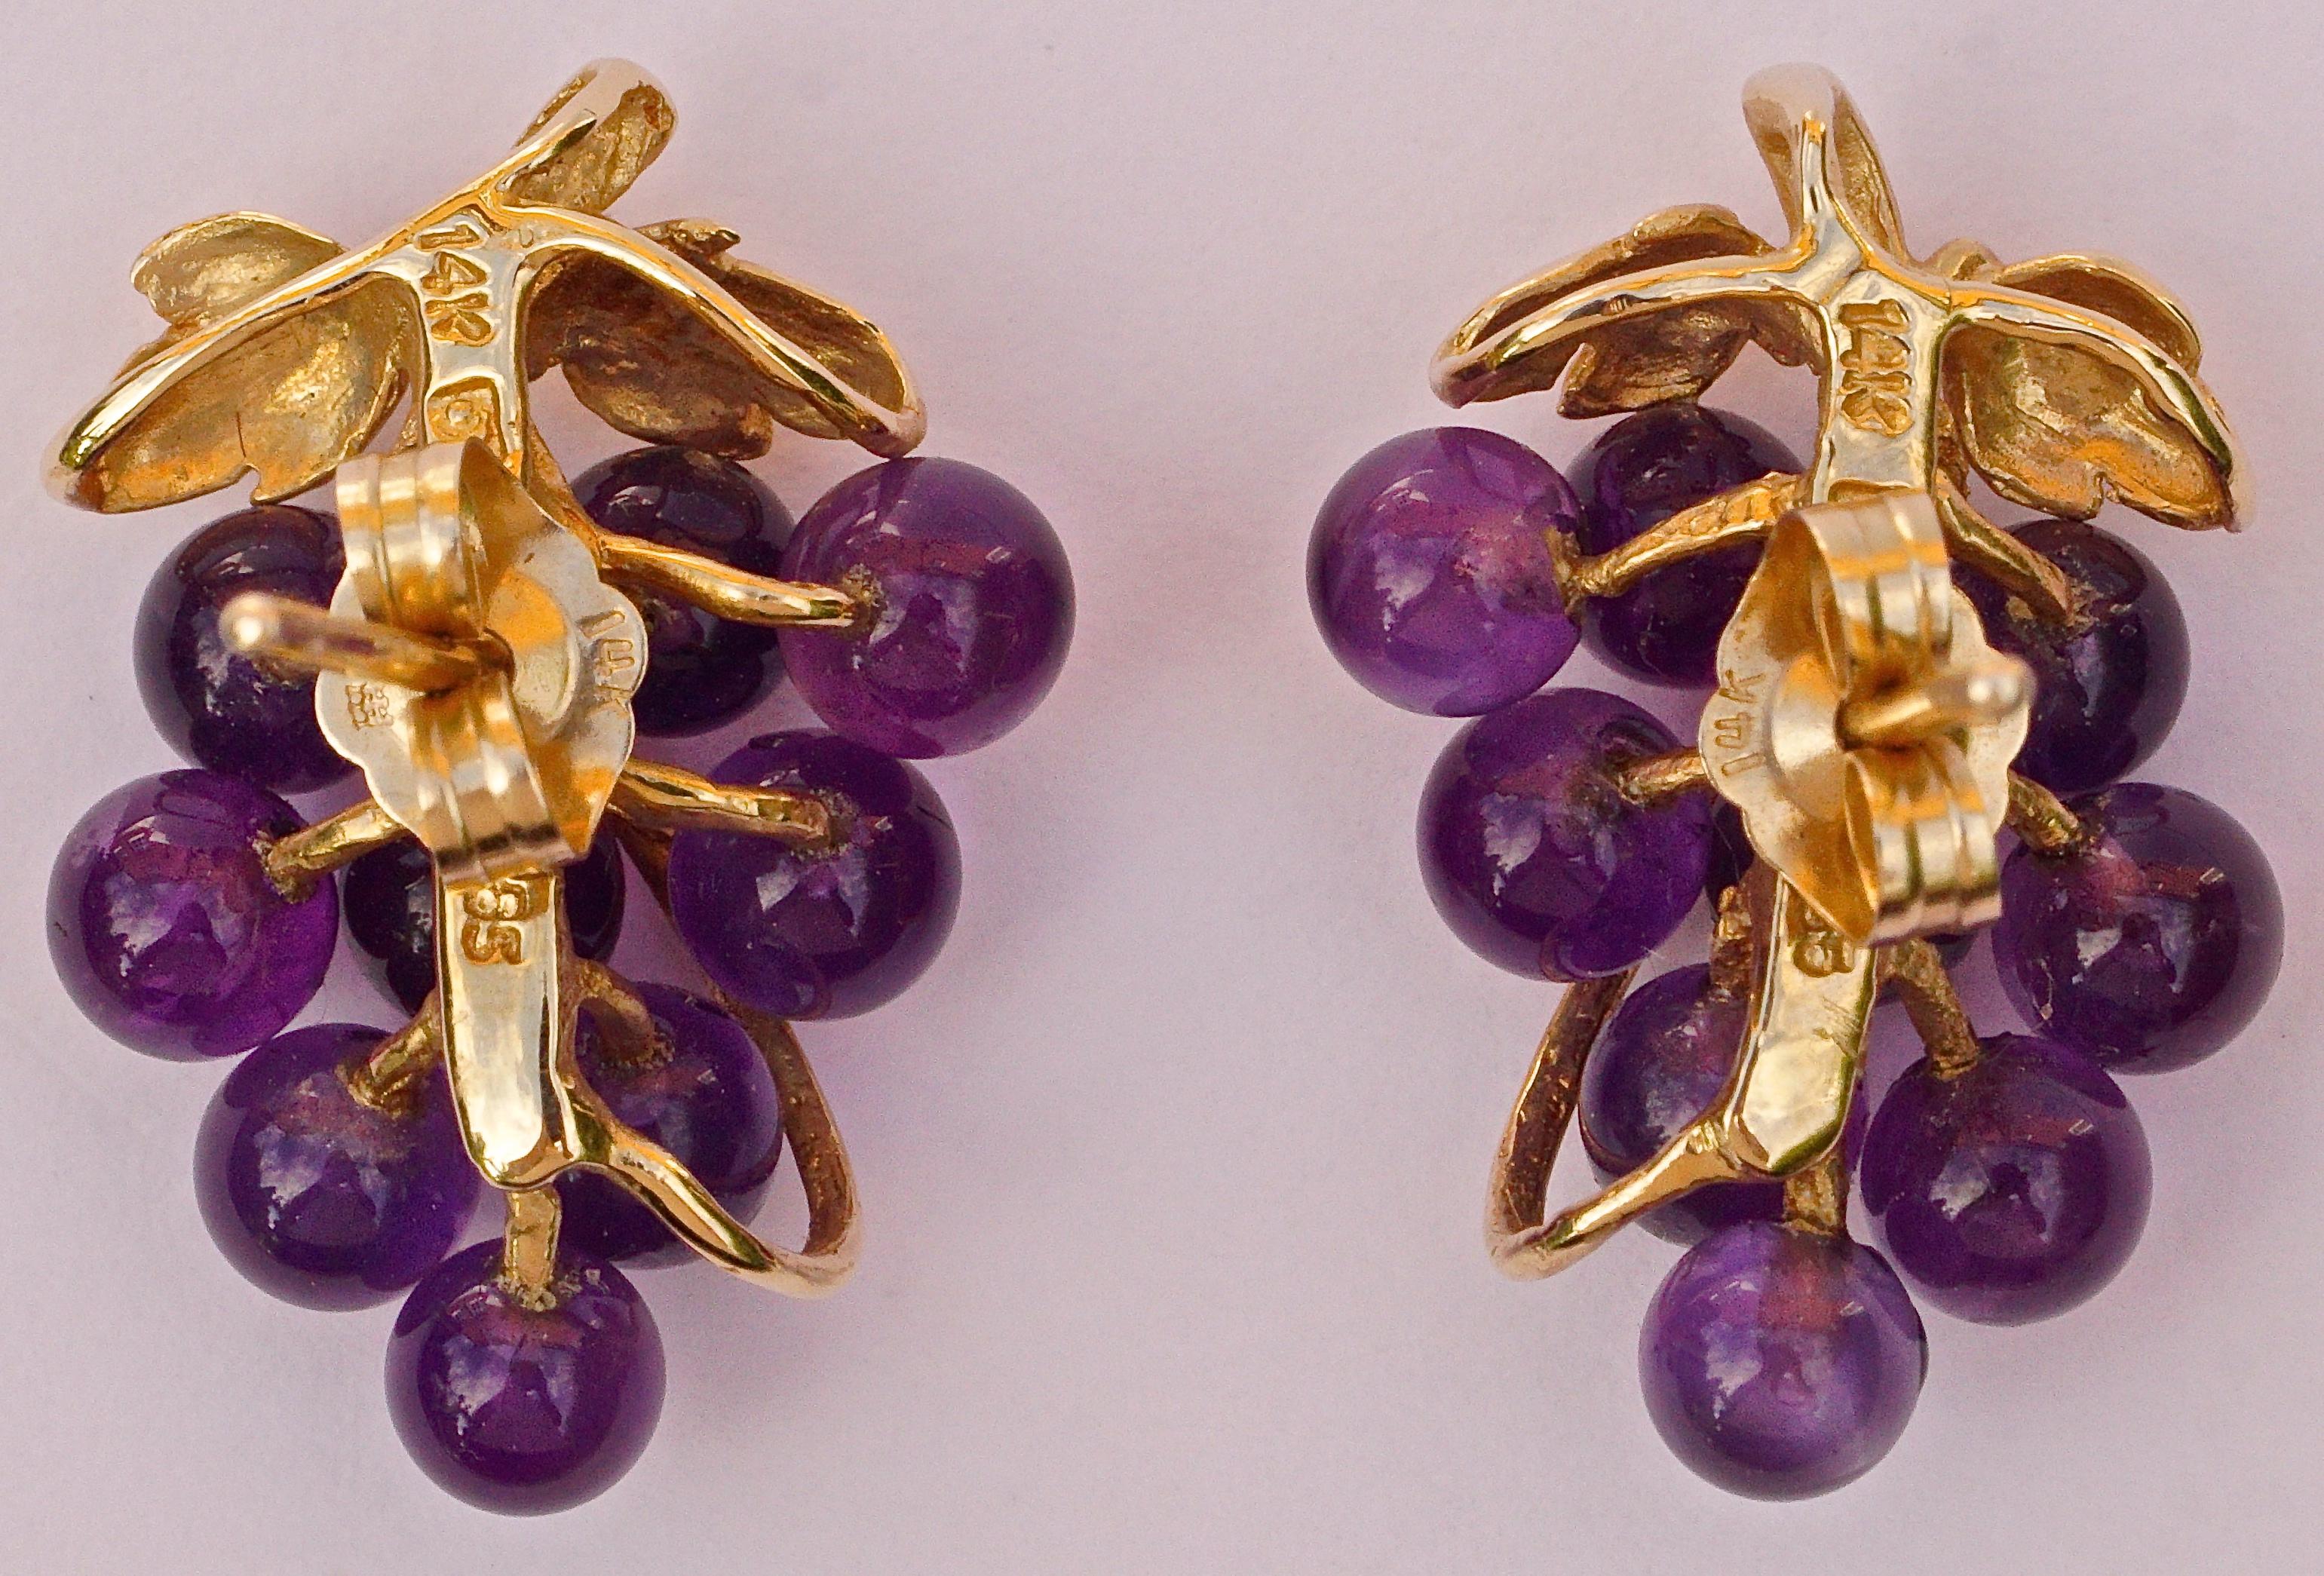 14K gold earrings for pierced ears, featuring a lovely grape design with vine leaves and nine polished amethyst grapes.  The earrings measure 1.9 cm / .75 inch by 1.2 cm / .47 inch. They are in very good condition.

These are beautiful gold and